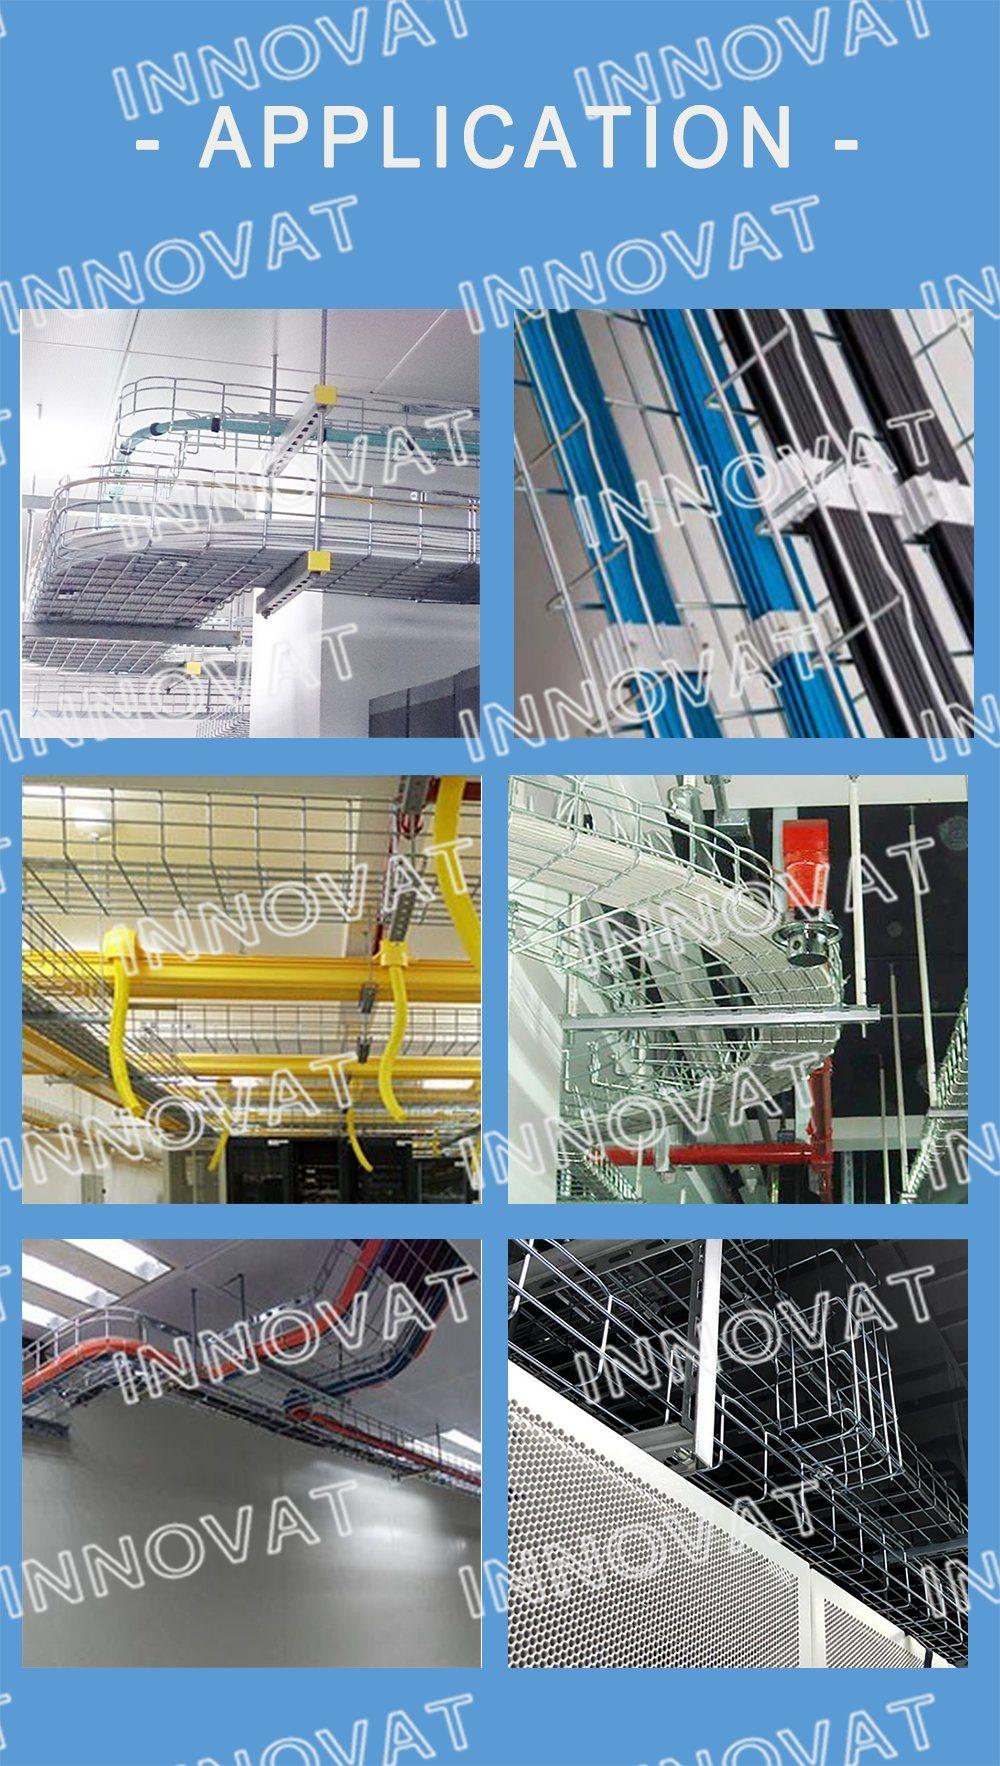 Wire Mesh Cable Tray Straight Type with Accessories Galvanised Ventilated Easy to Install Cable Tray